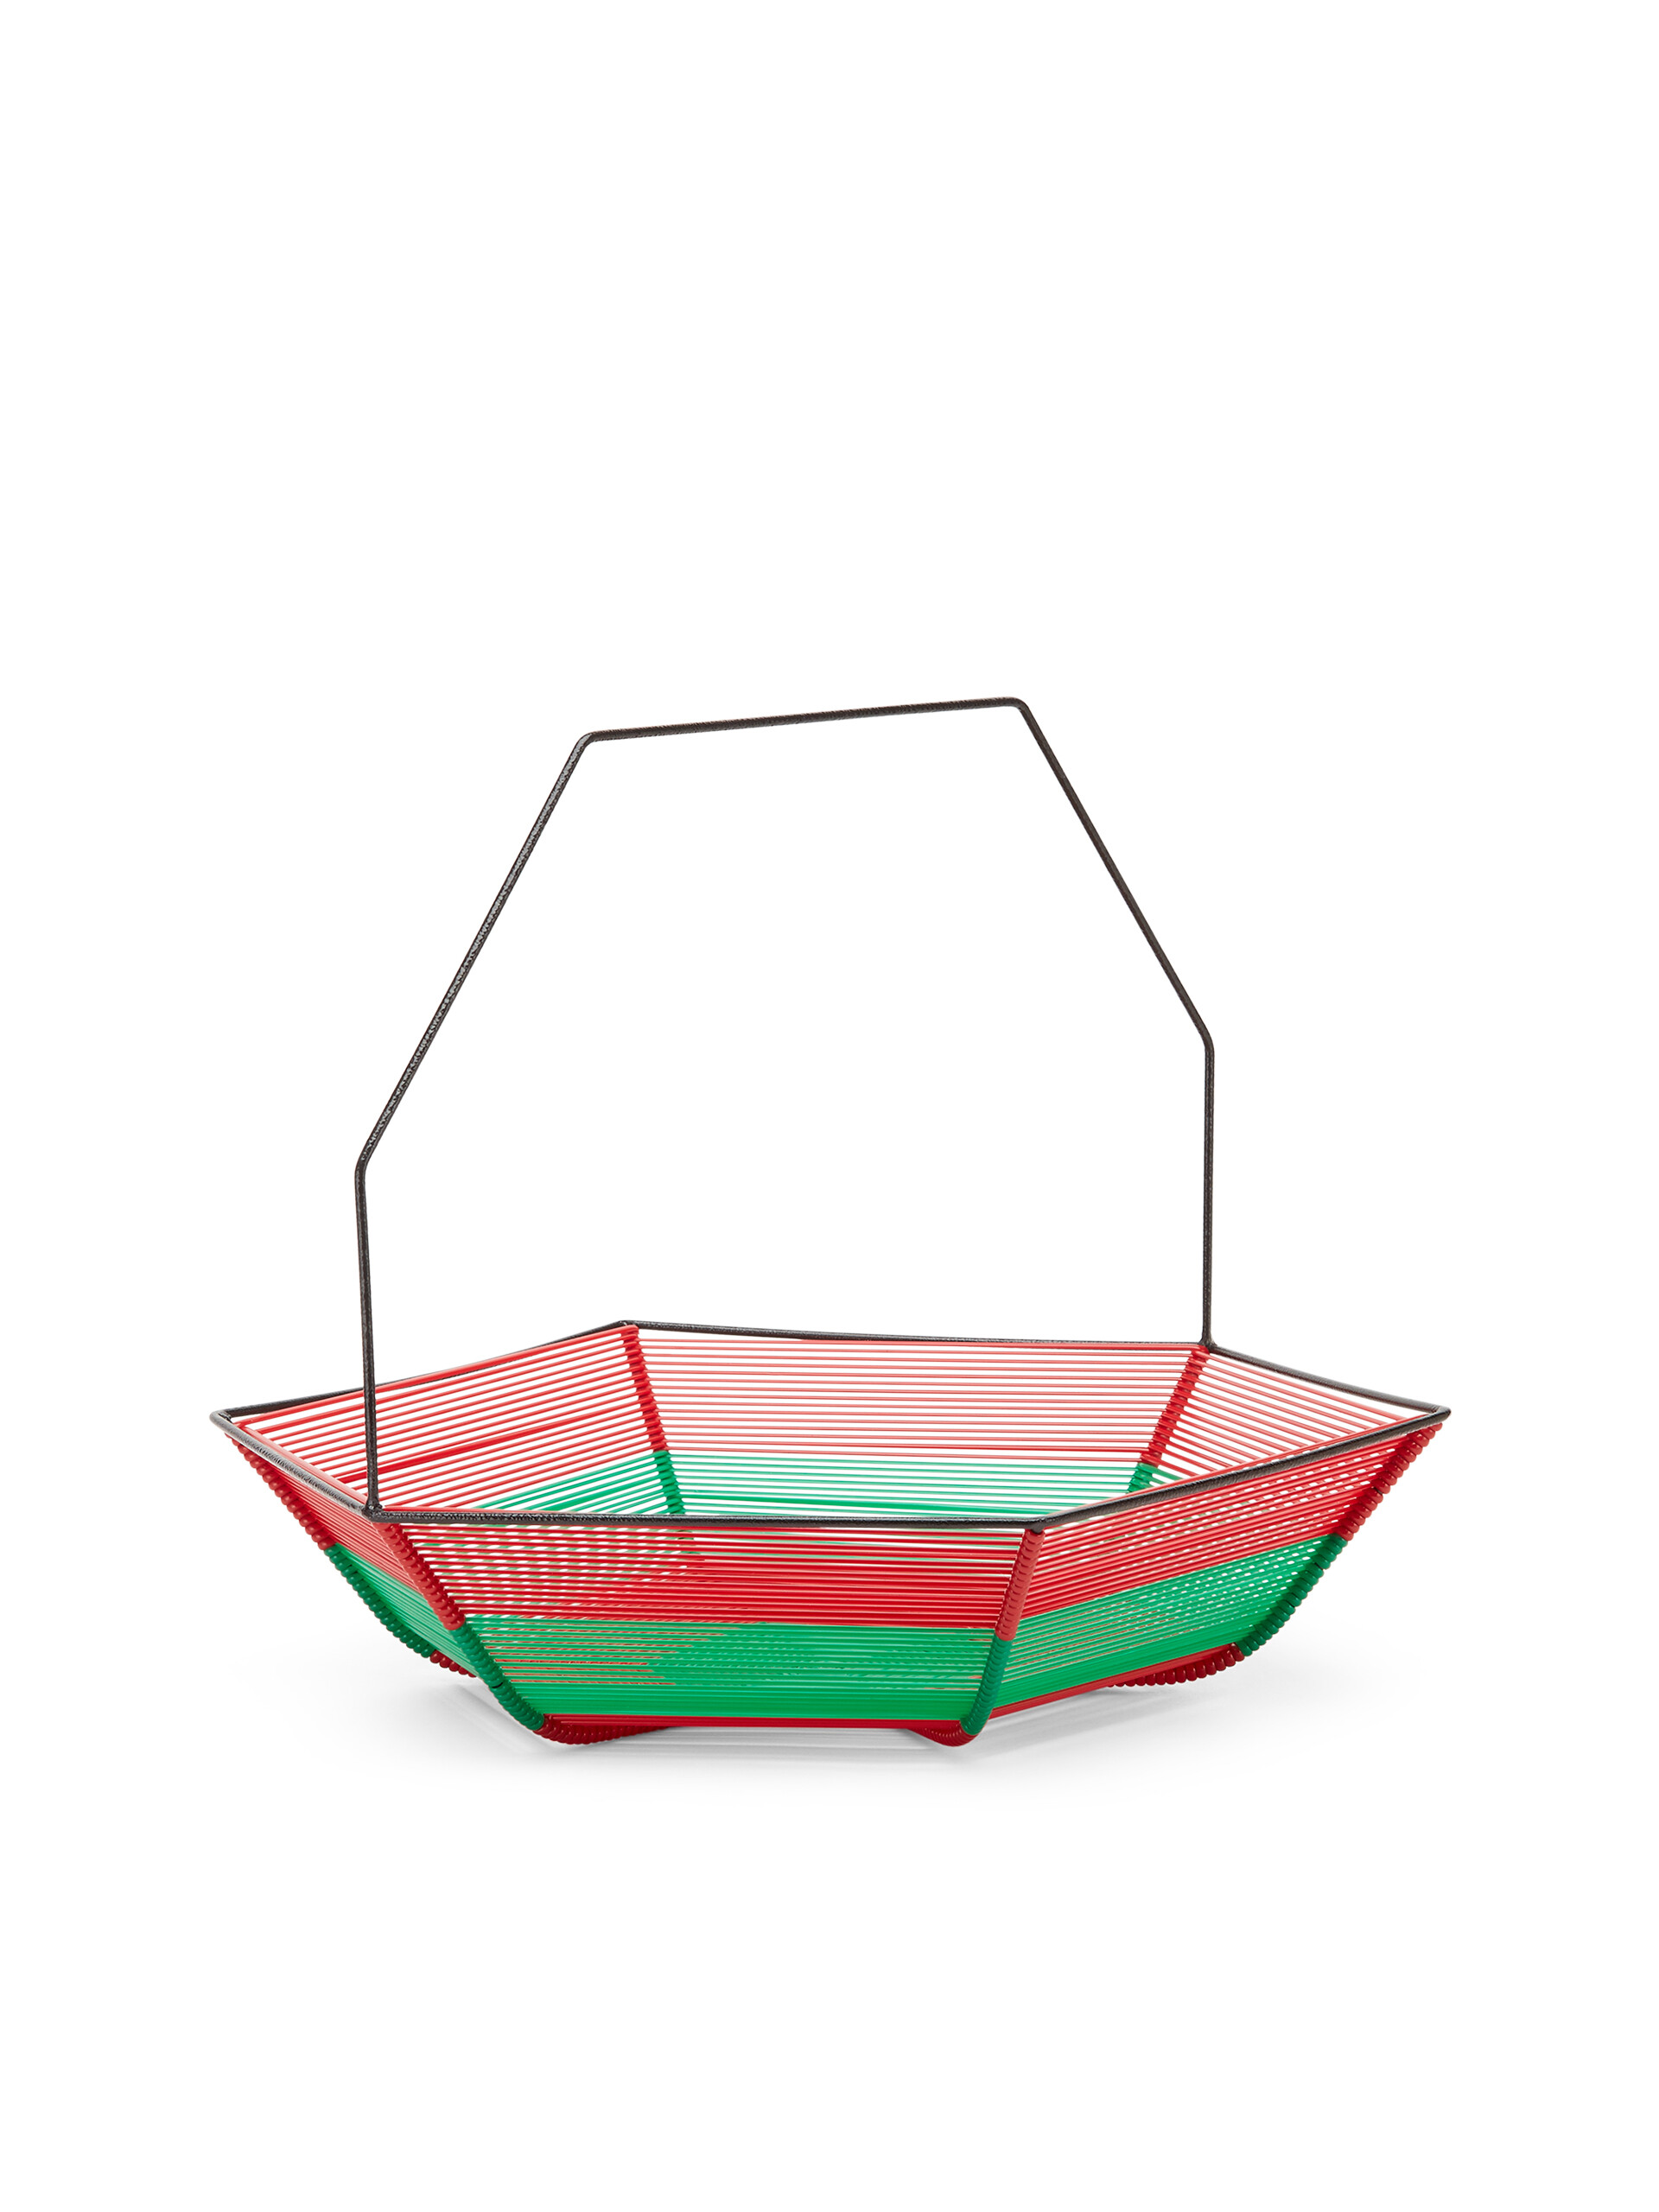 MARNI MARKET hexagonal green and red fruit holder - Accessories - Image 2